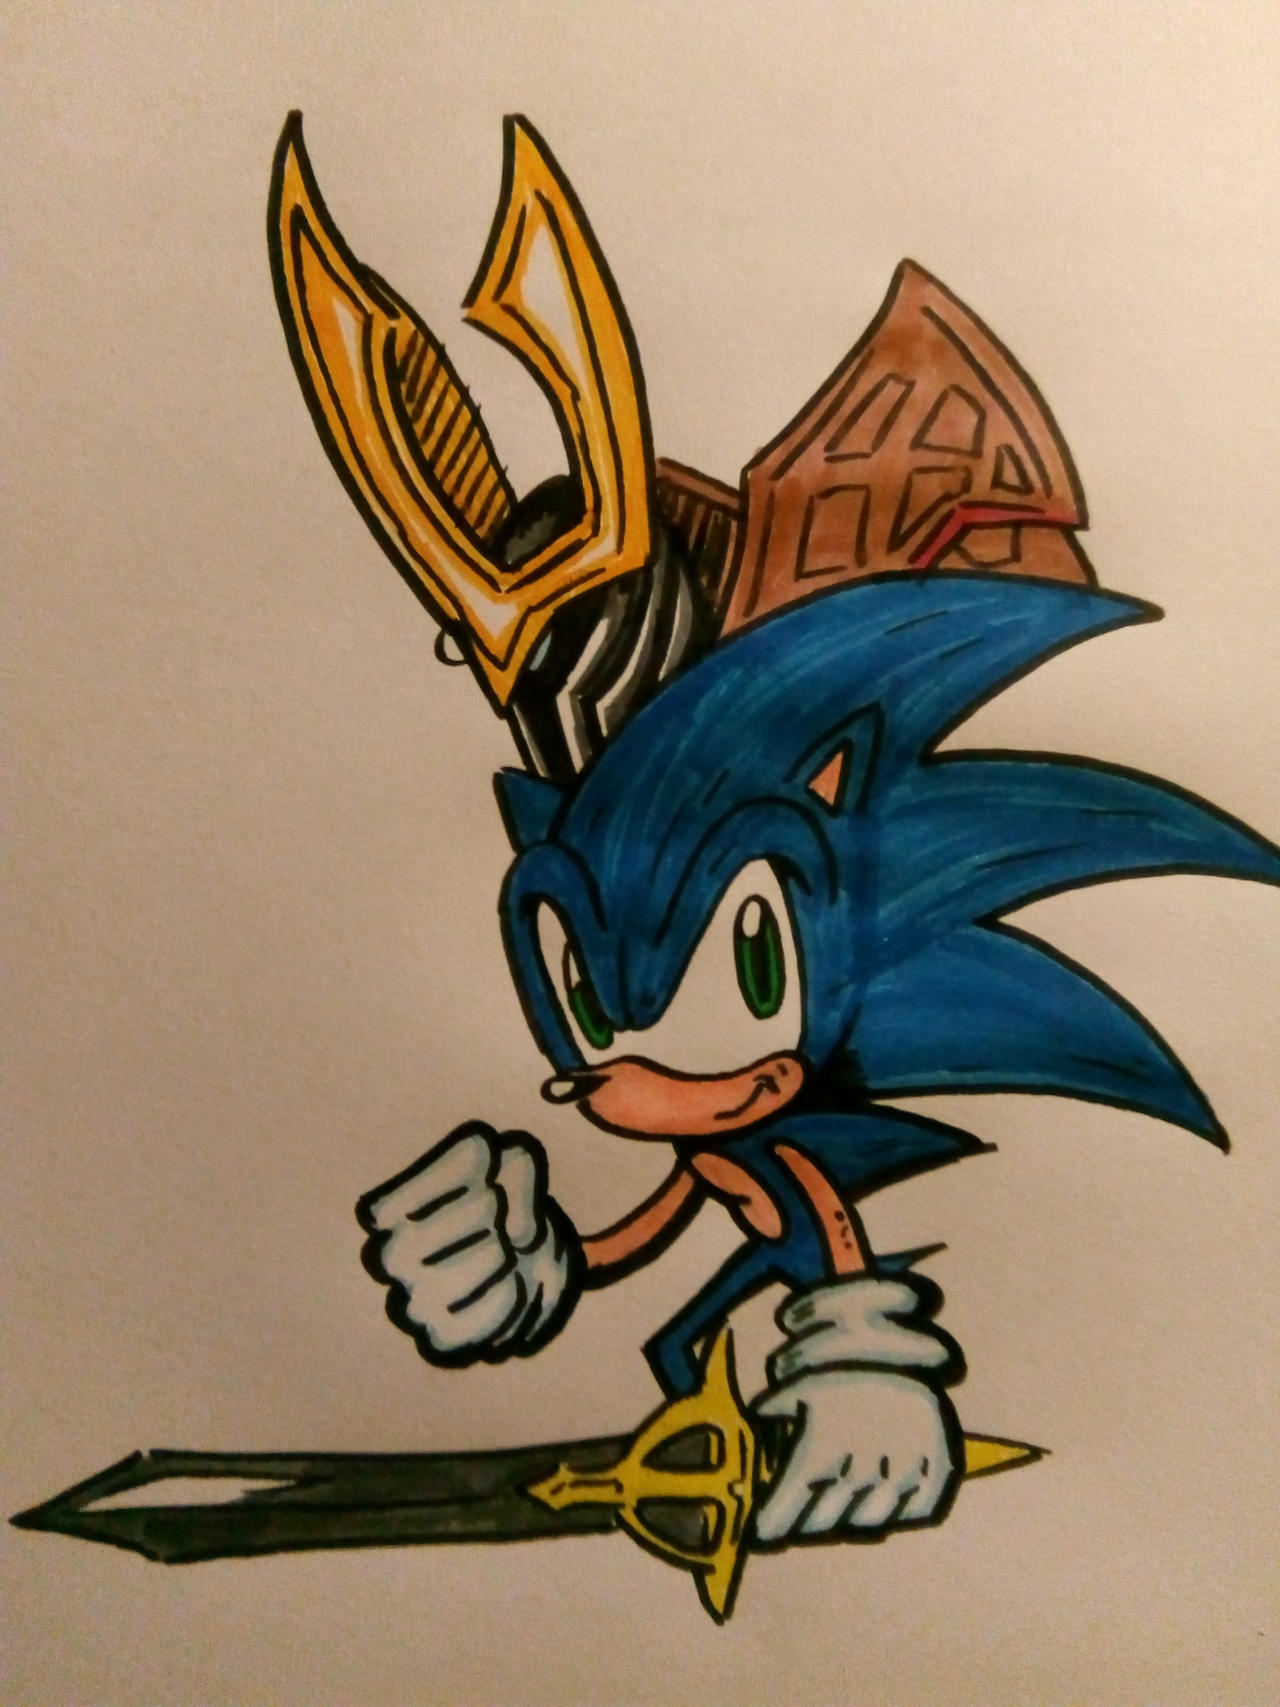 Sonic Chronicles The Dark Brotherhood, Sonic and the Black Knight, sonic  Unleashed, Sonic Forces, Tails, sonic The Hedgehog, digital Art, Fan art,  anime, character